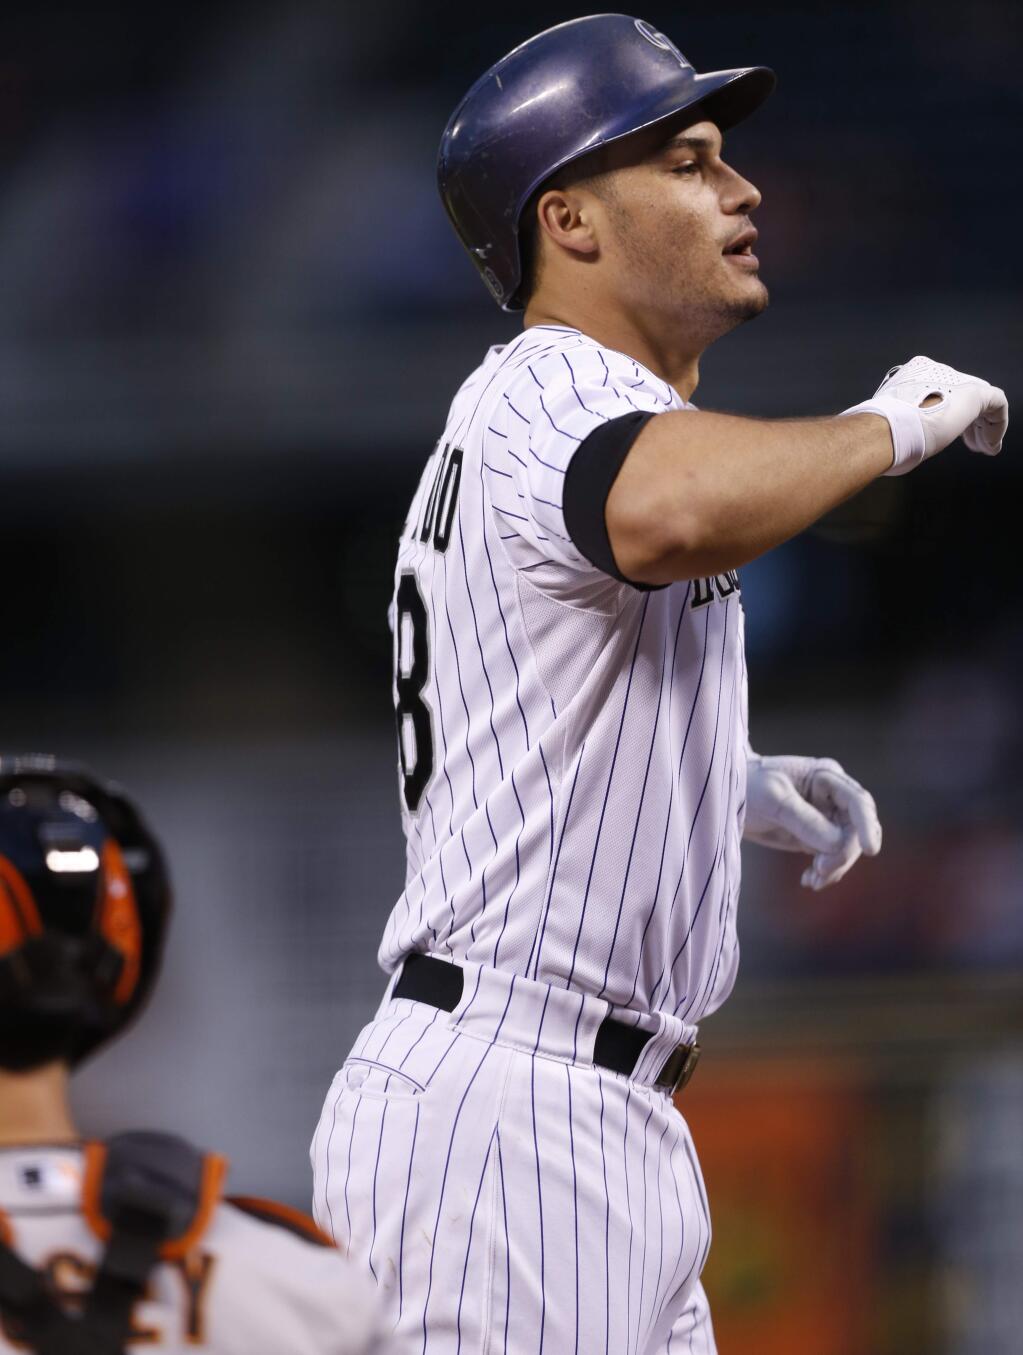 Colorado Rockies' Nolan Arenado celebrates as he crosses home plate after hitting a solo home run off San Francisco Giants starting pitcher Chris Heston in the first inning of a baseball game Friday, Sept.. 4, 2015, in Denver. (AP Photo/David Zalubowski)